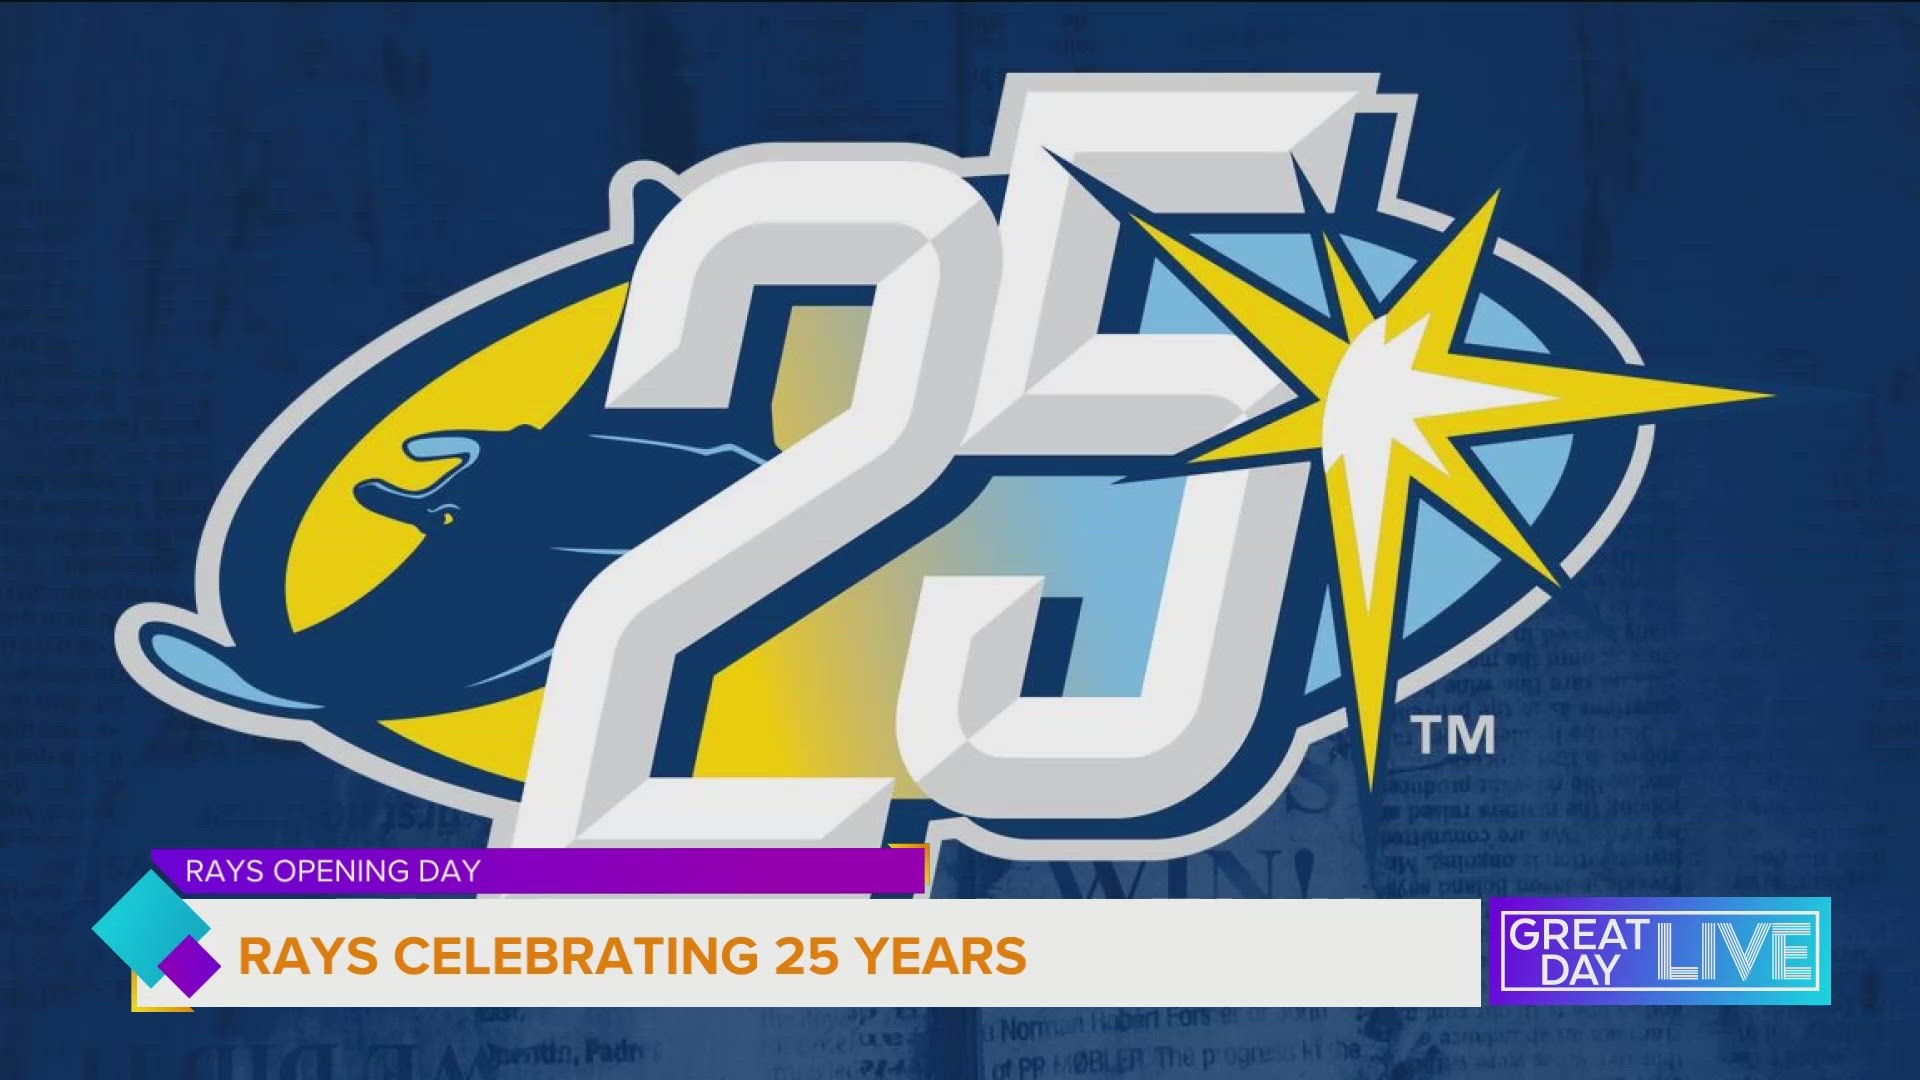 Rays’ Bill Walsh shows off the new 25-year anniversary logo and how you can get your hands on merchandise sporting the new look.